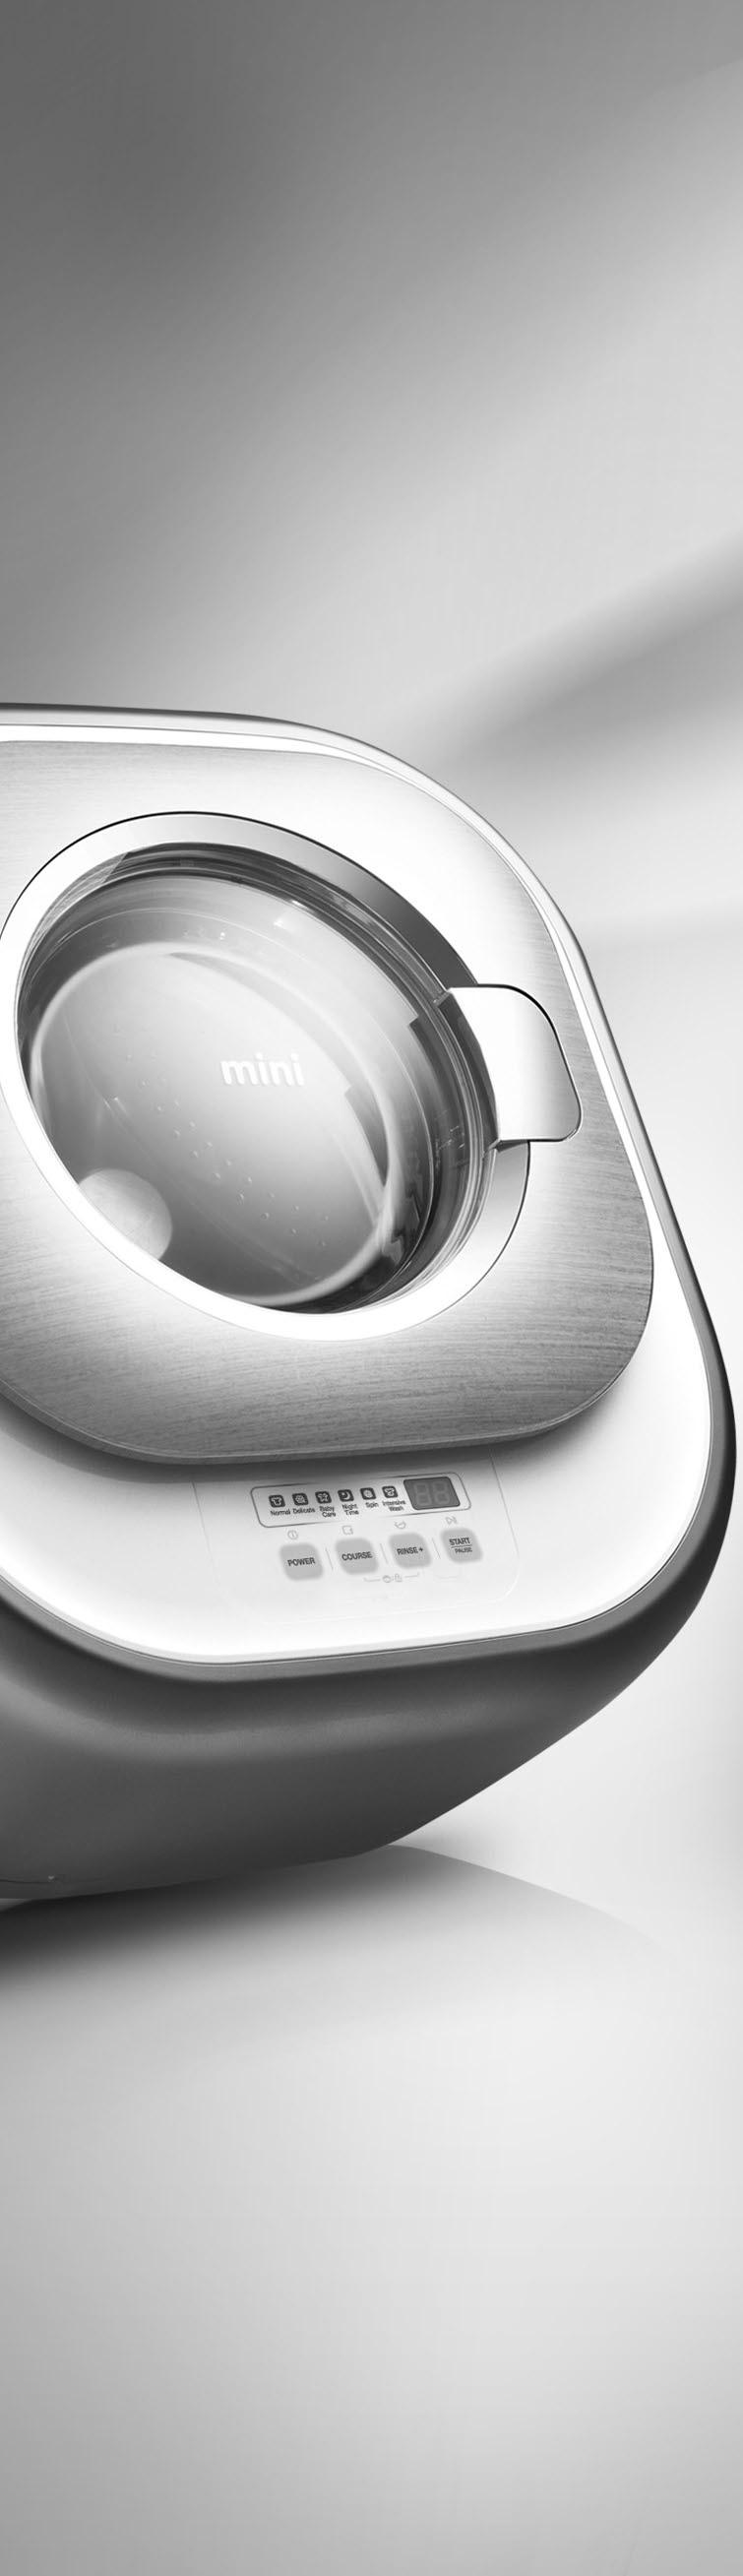 Wall-Mounted Front Load Washer World's First Ever Design mini is a unique home appliance featuring an innovative design and practical functions.